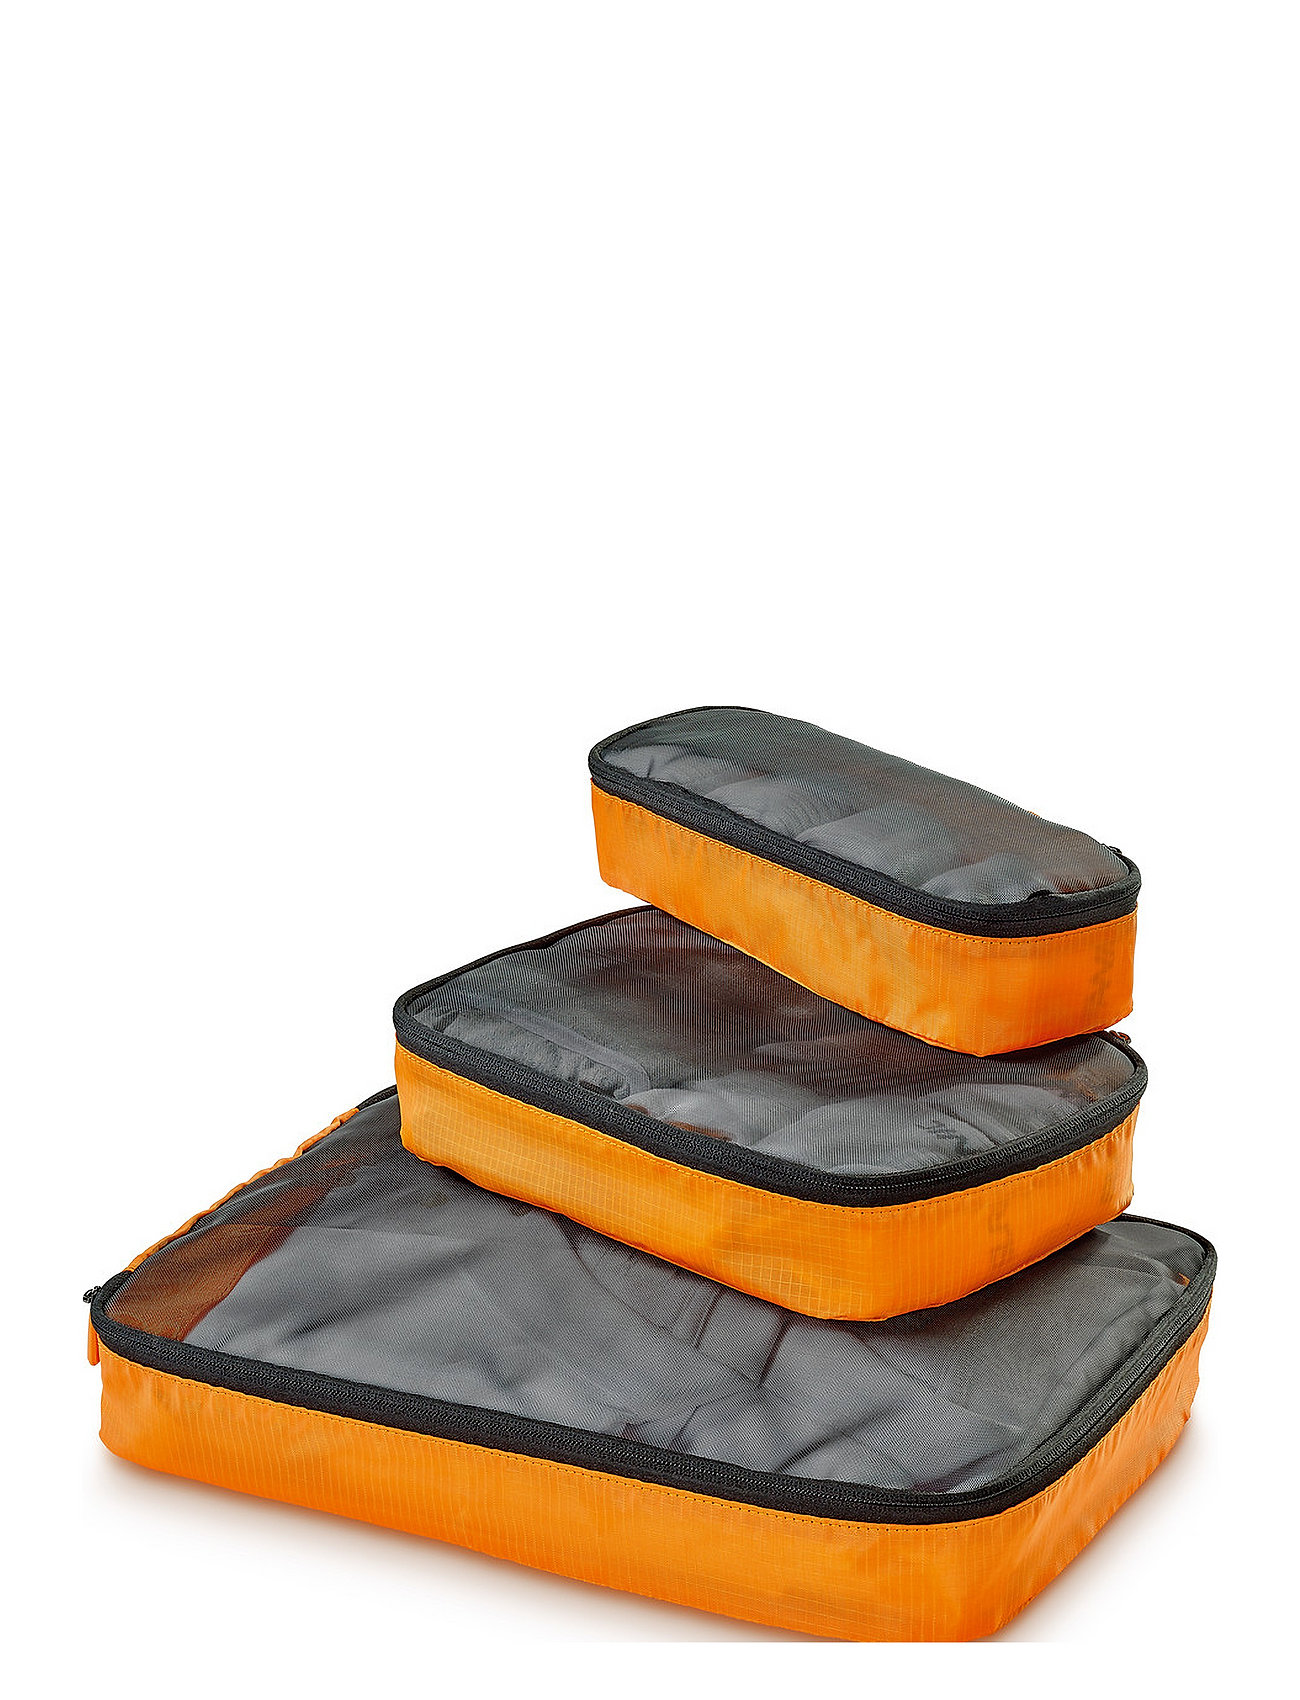 Triple Packing Cubes Bags Travel Accessories Orange Go Travel